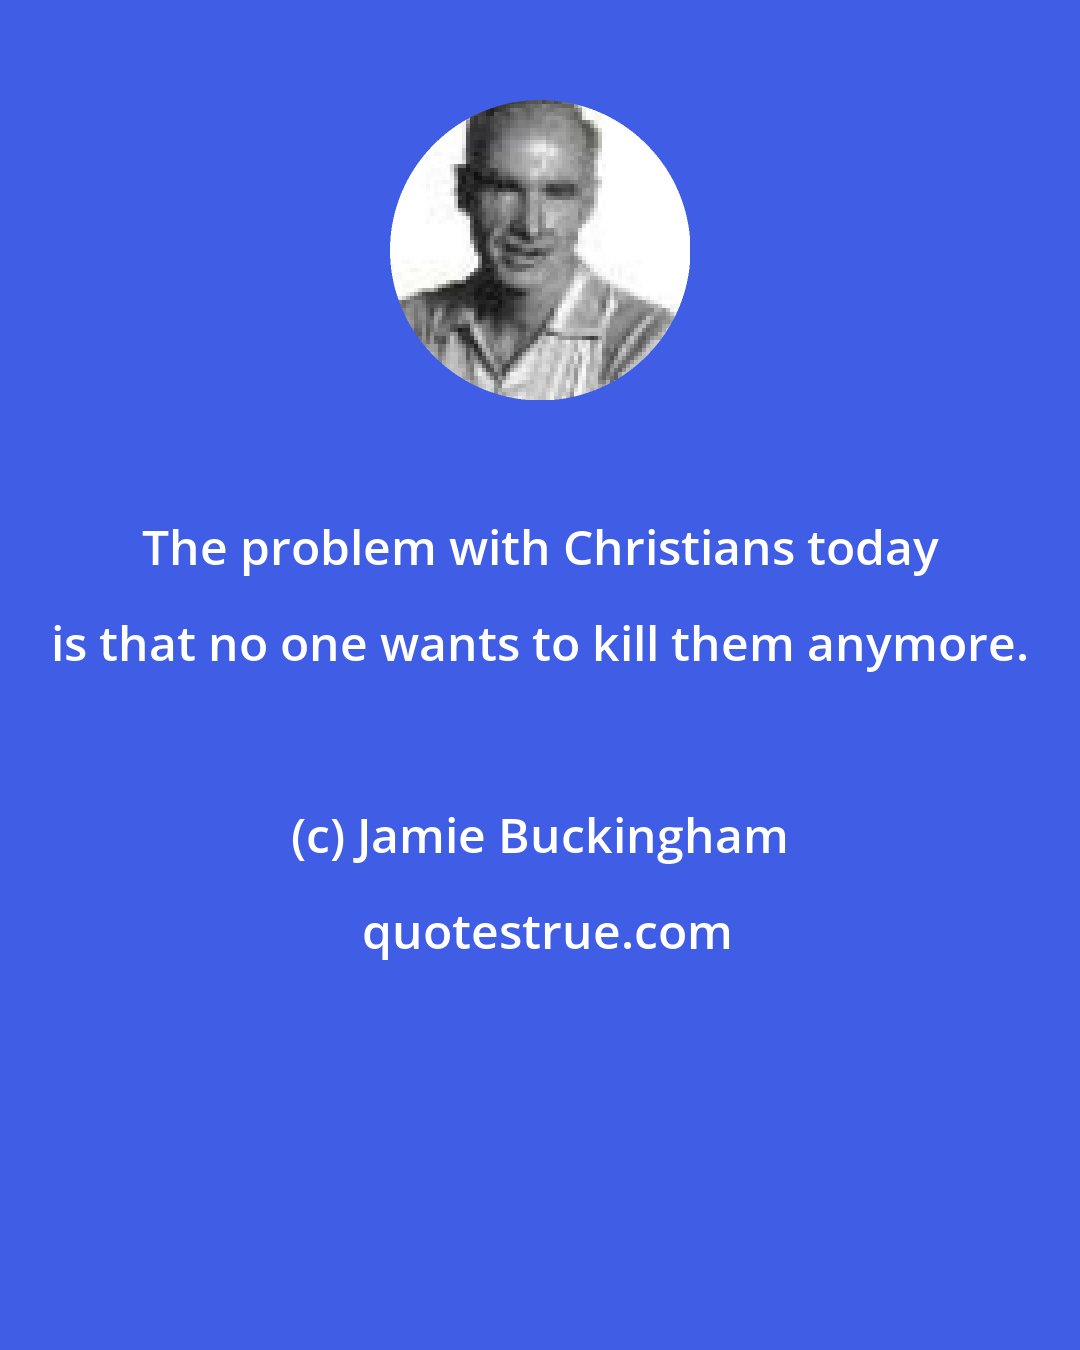 Jamie Buckingham: The problem with Christians today is that no one wants to kill them anymore.